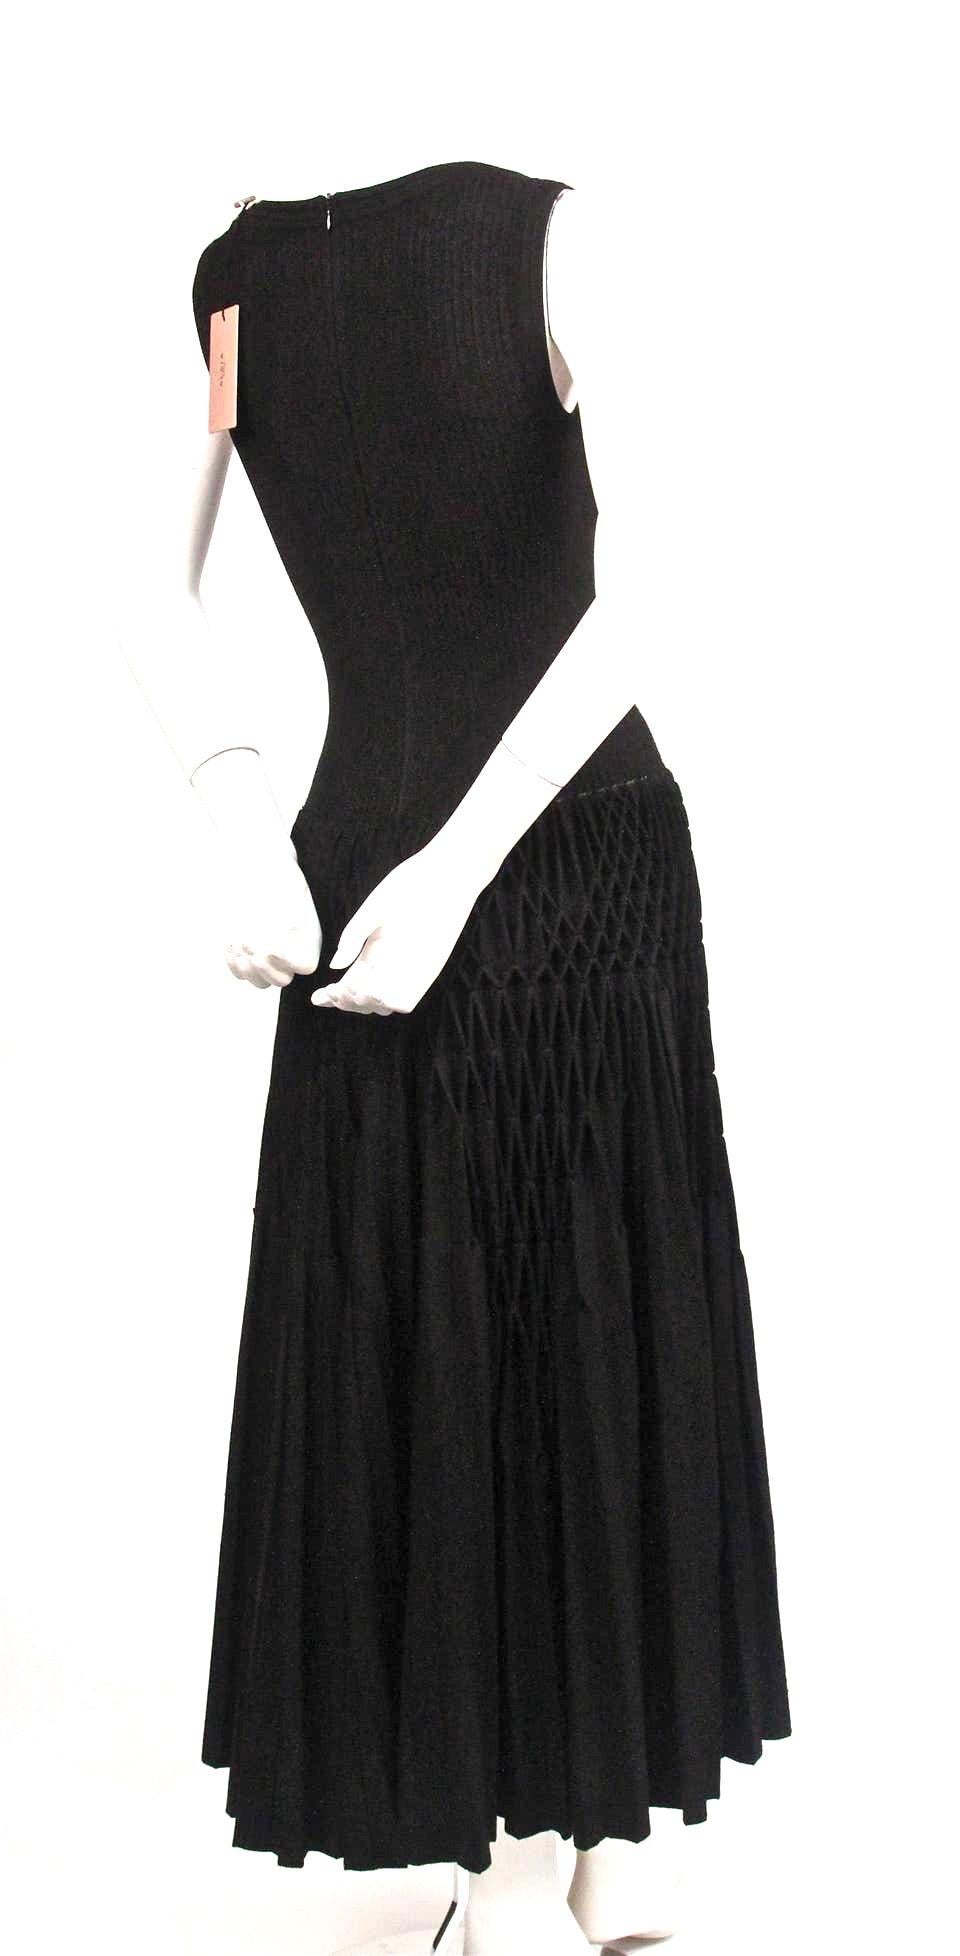 Jet-black, knit 'Plissé Abeille' dress from Azzedine Alaia dating to 2014 and seen on the runway. Dress is labeled a French size 38. Approximate un-stretched measurements: shoulder 13